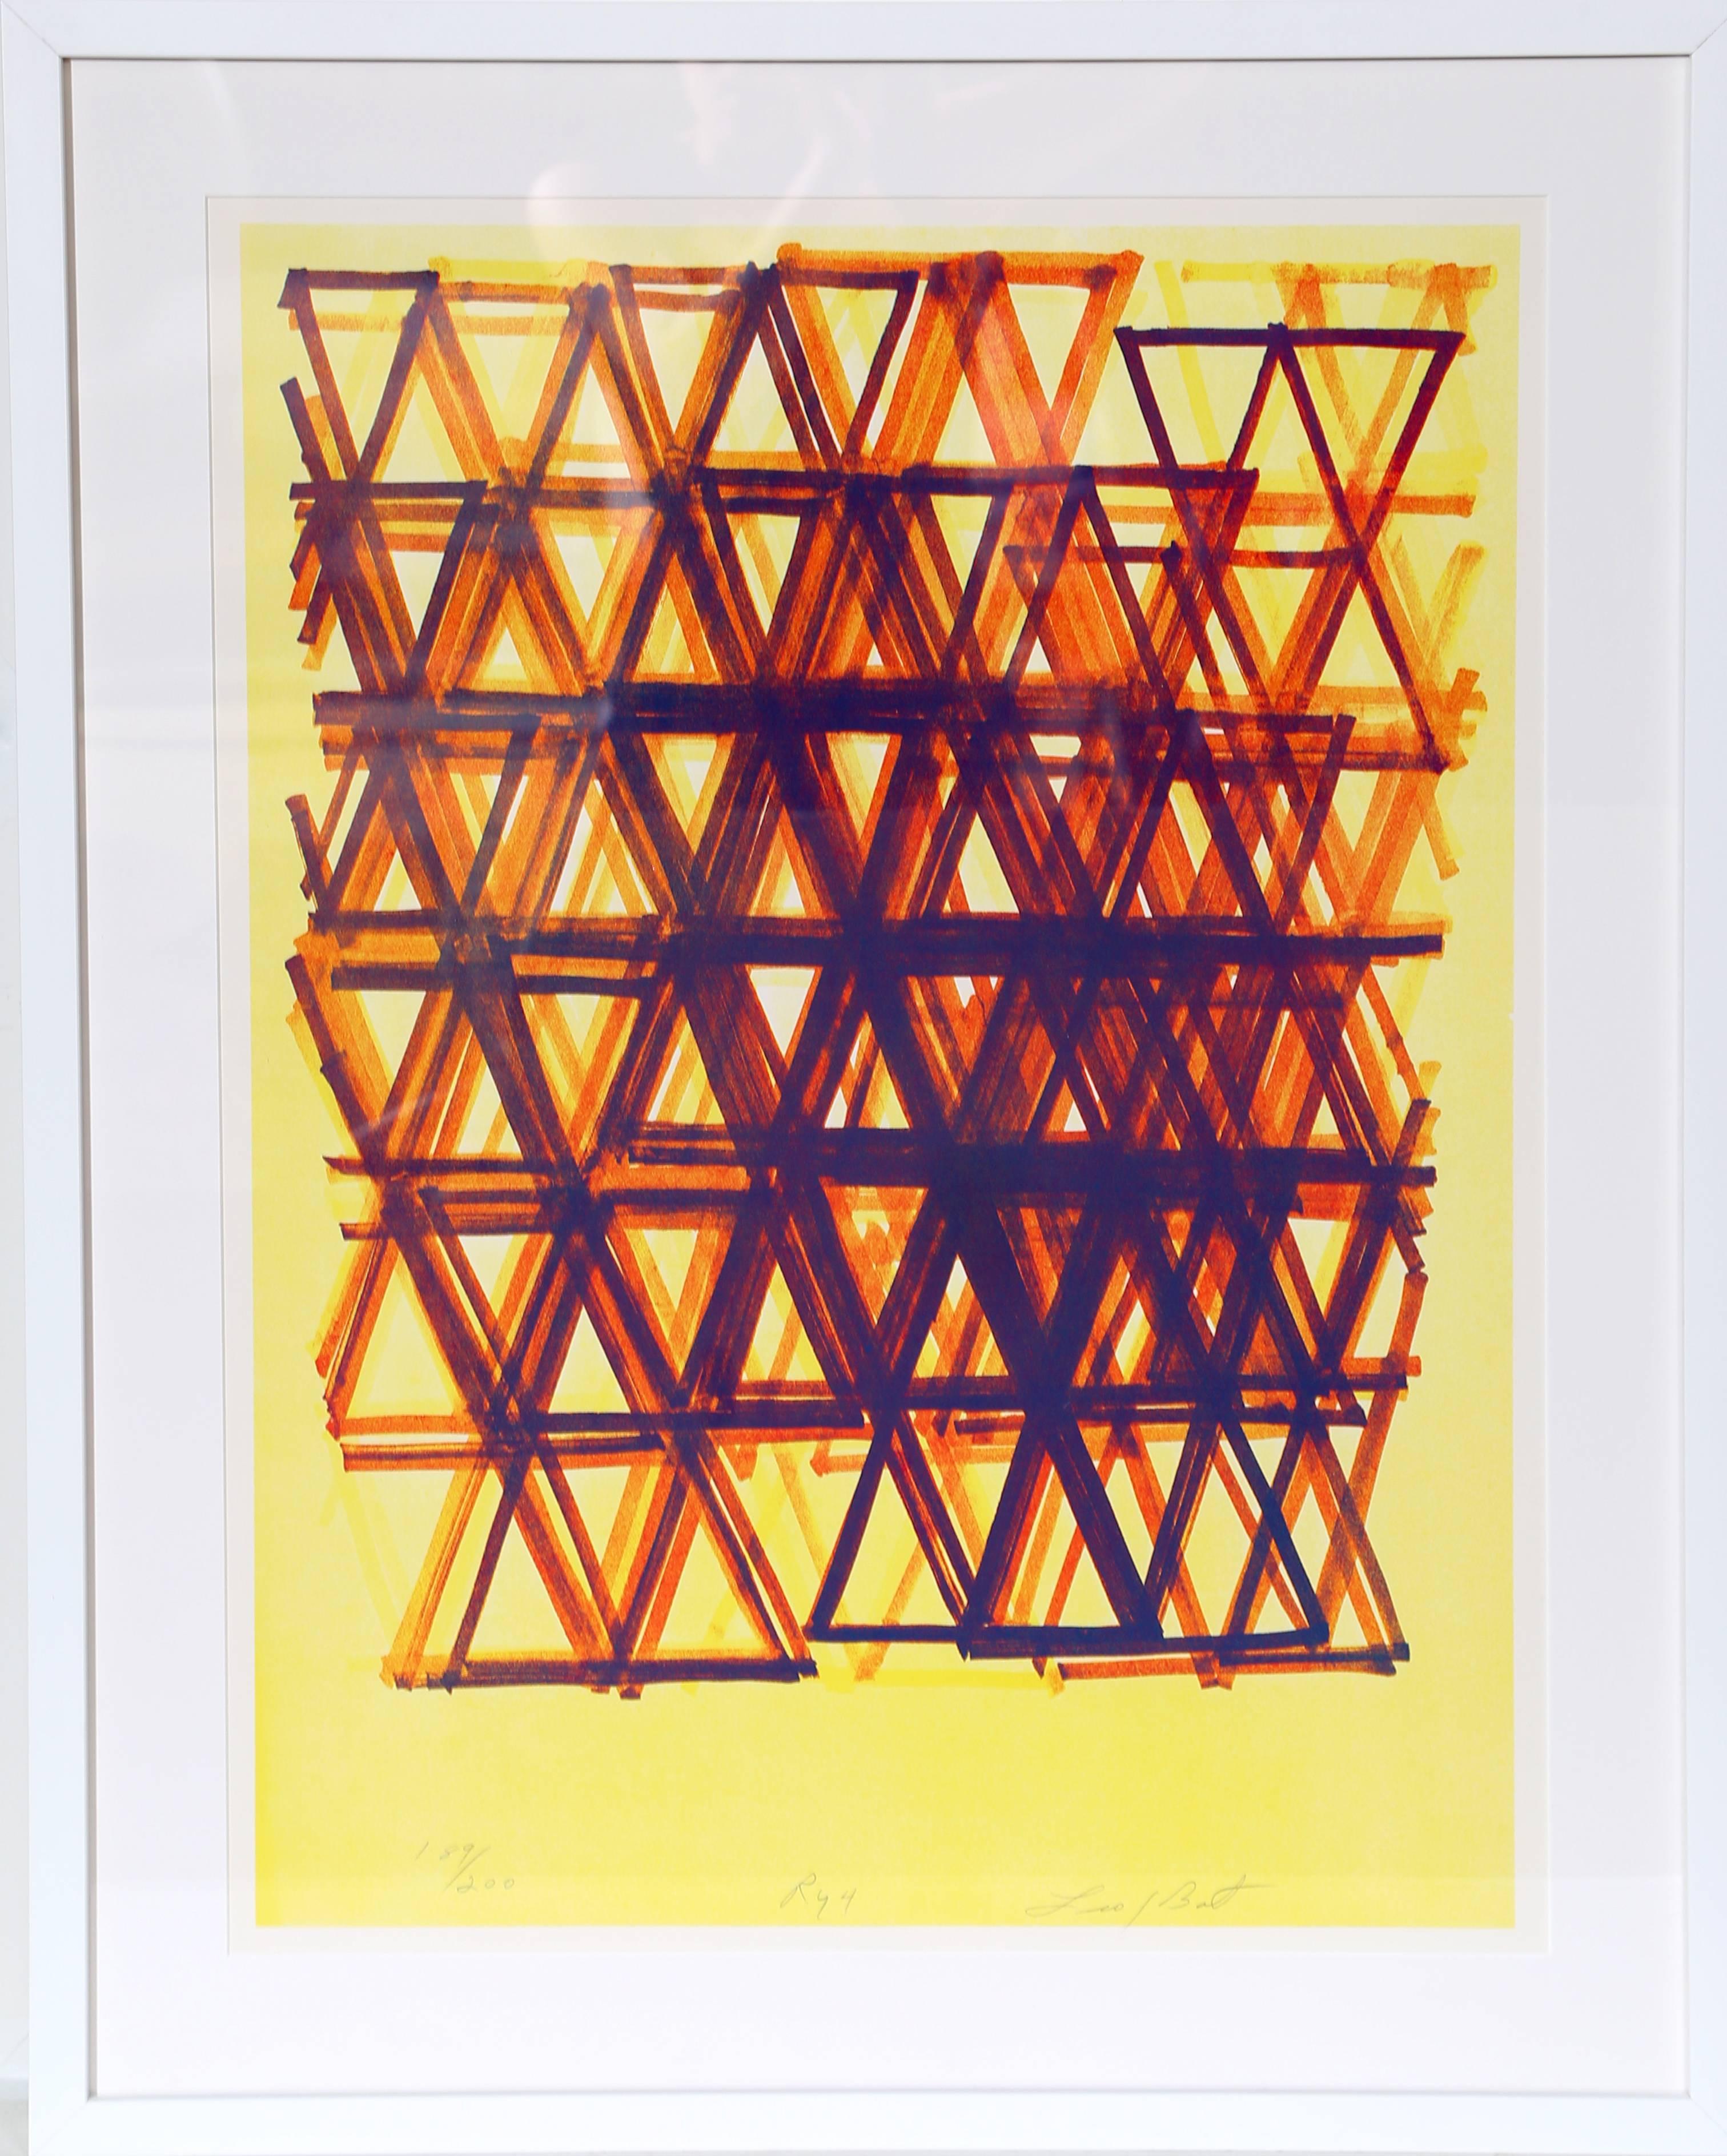 Artist:  Leo Bates (1944 - )
Title: Rhythm Series IV 
Year: 1978
Medium: Lithograph, signed and numbered in pencil 
Edition: 200 
Paper Size: 30 x 22.5 inches 
Frame:  36 x 28.5 inches